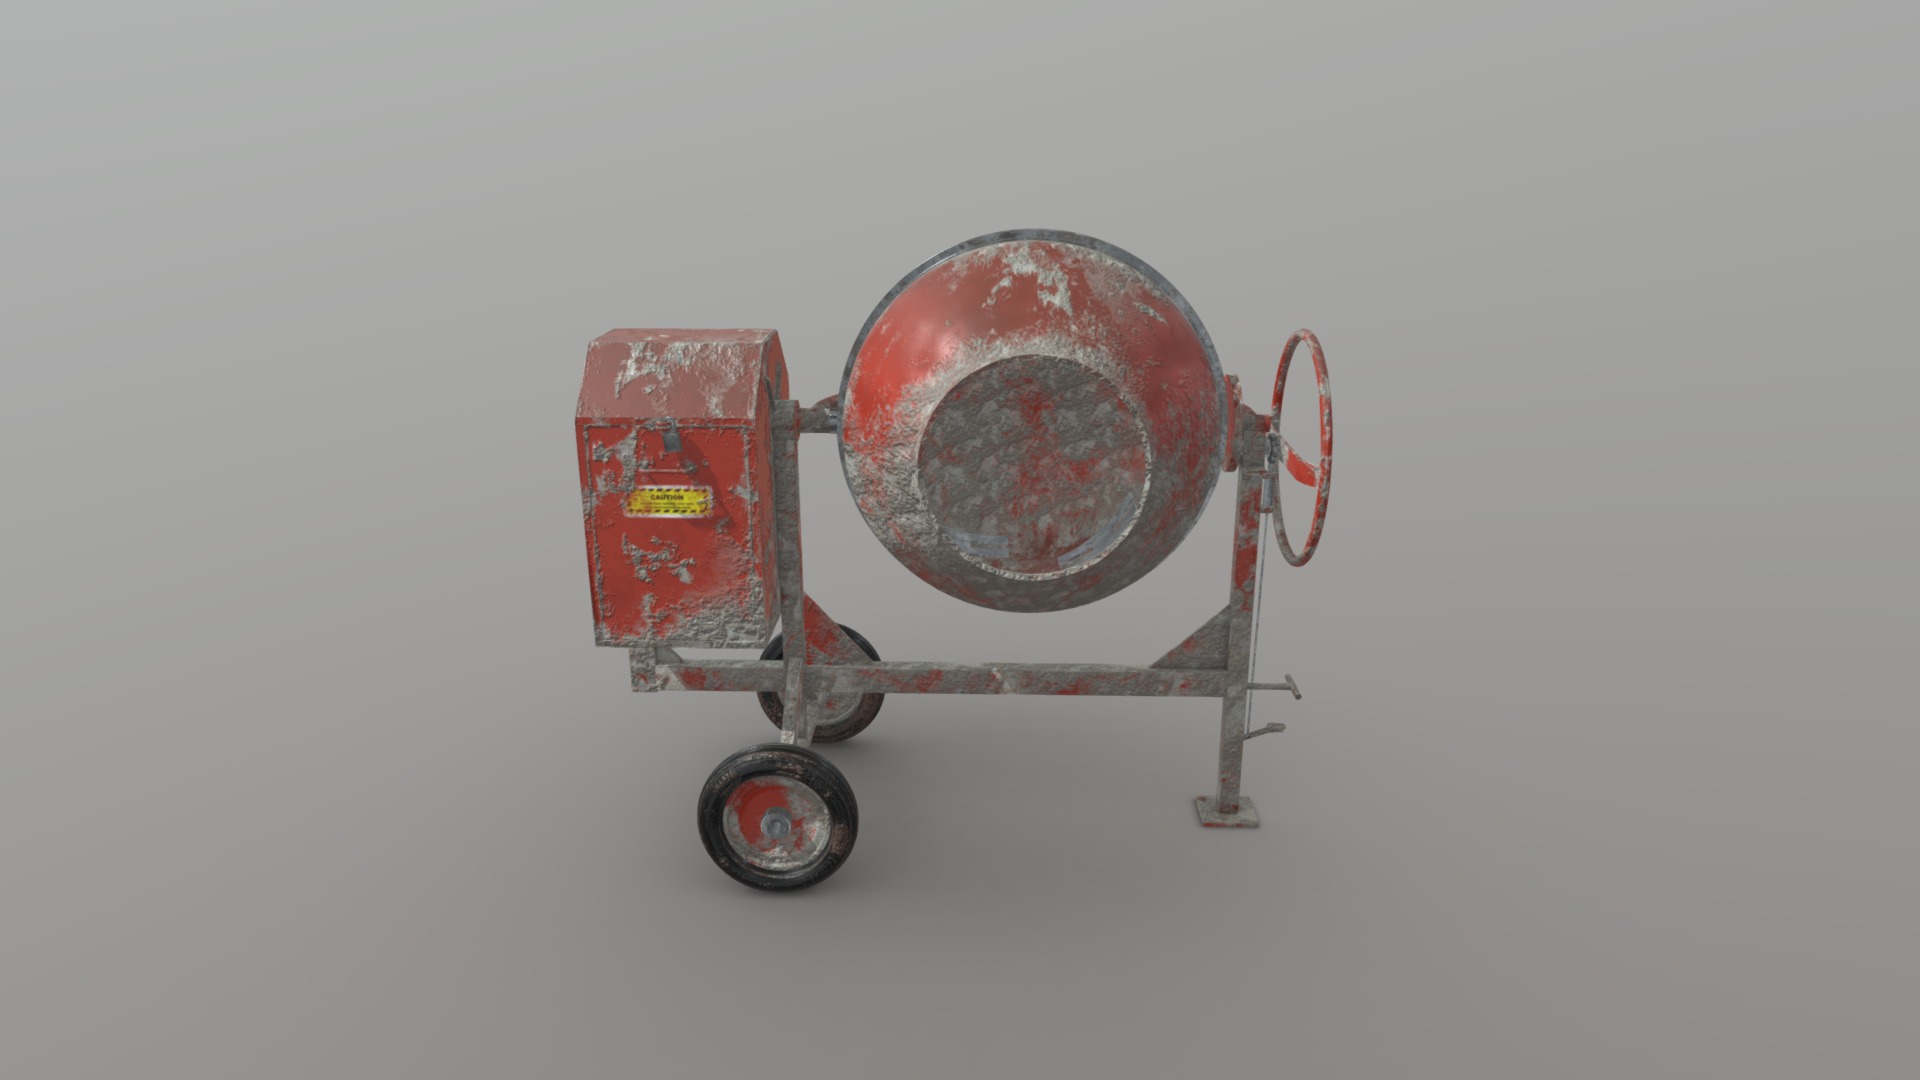 3D model Cement Mixer Dirty - This is a 3D model of the Cement Mixer Dirty. The 3D model is about a red and white shopping cart.